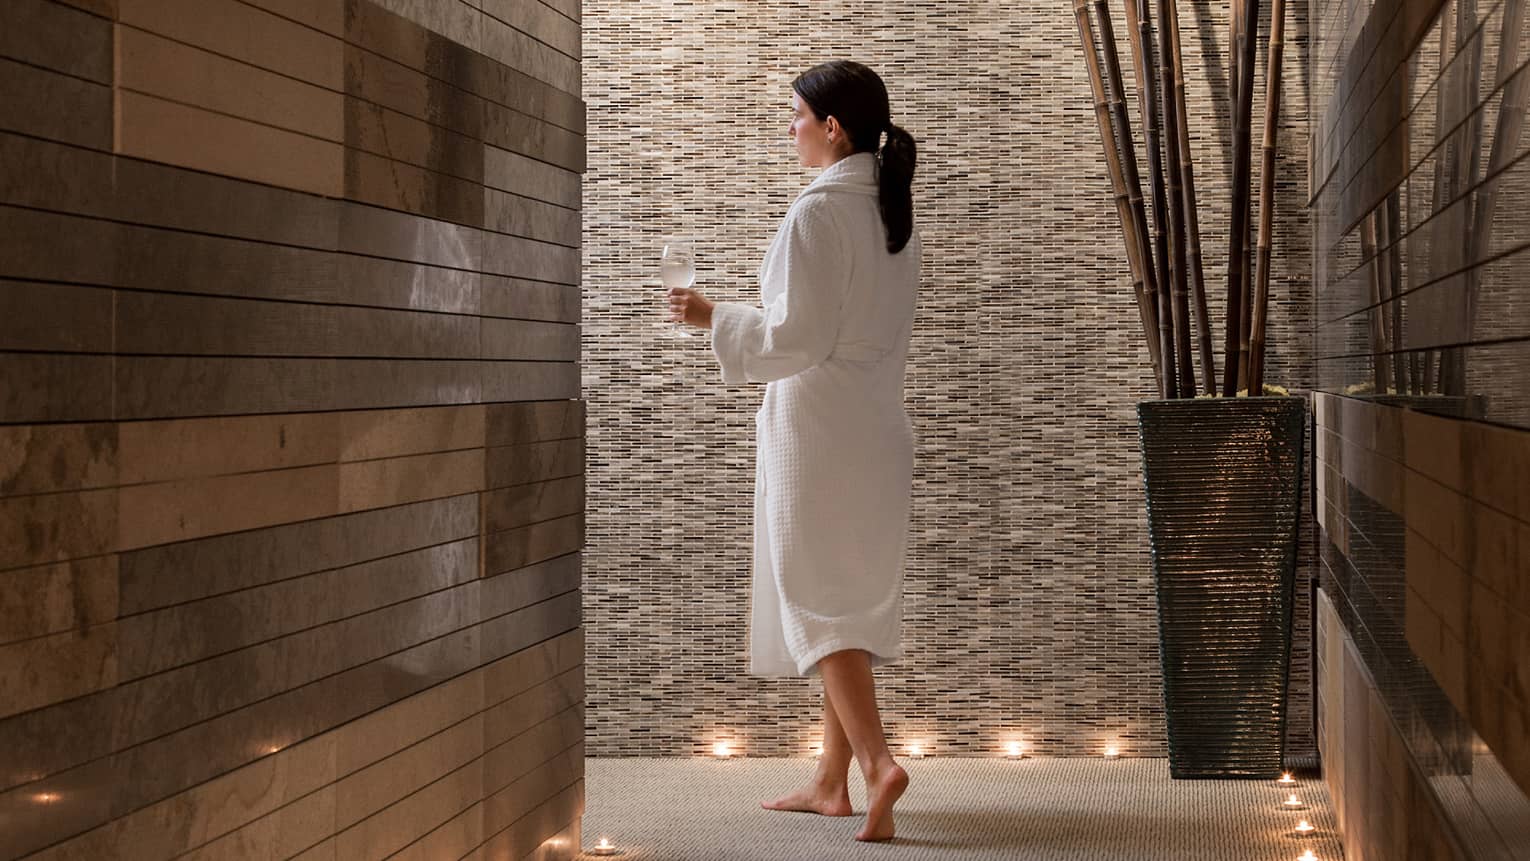 Woman in bathrobe holding wine glass with water walks through spa